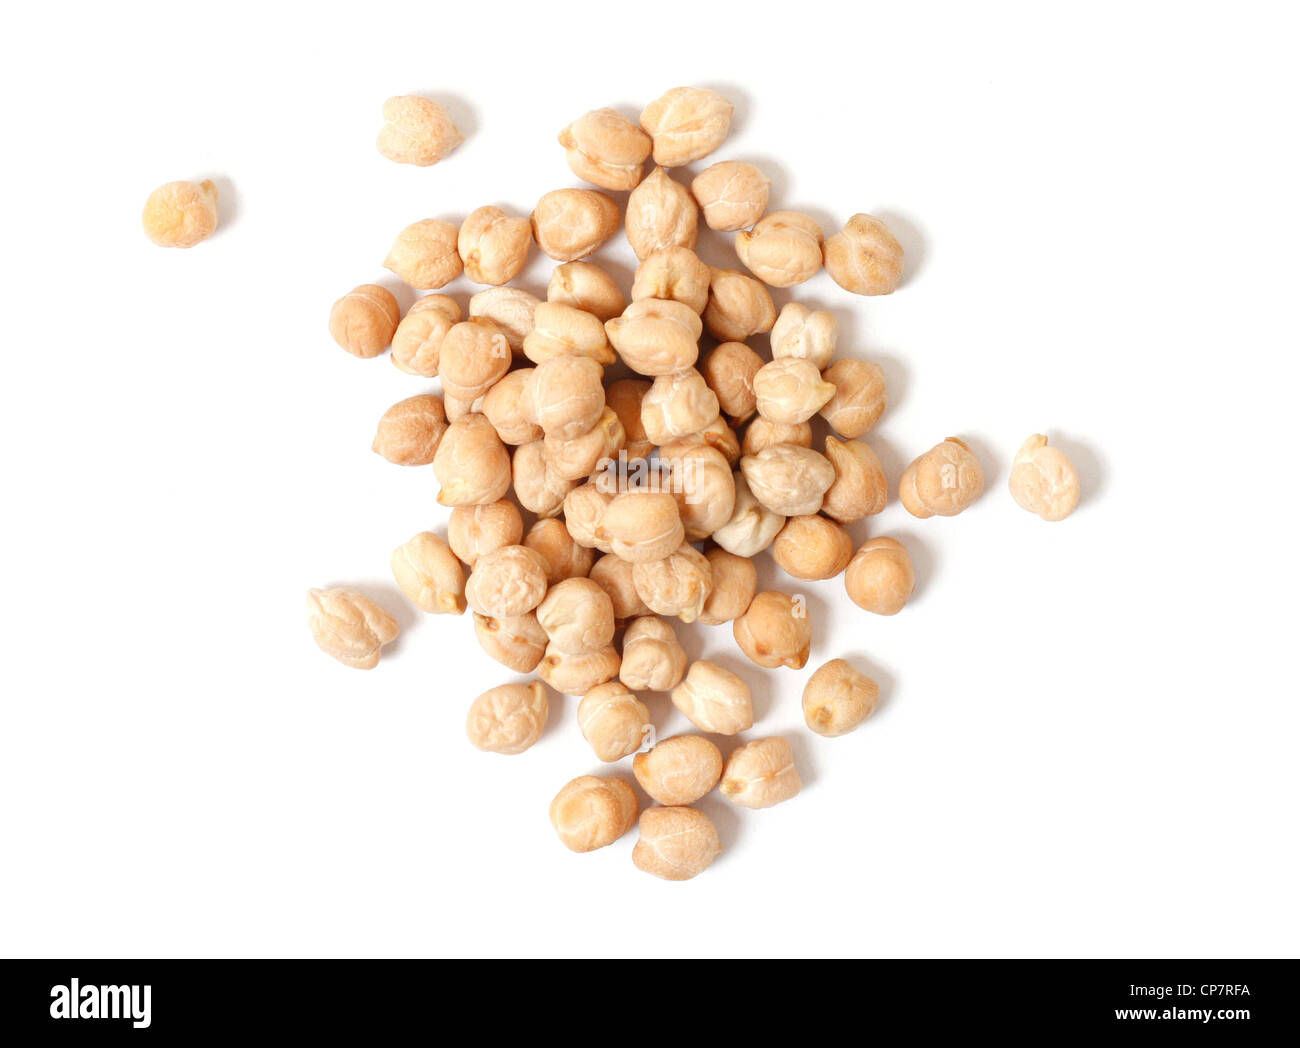 A lot of organic chickpeas Stock Photo